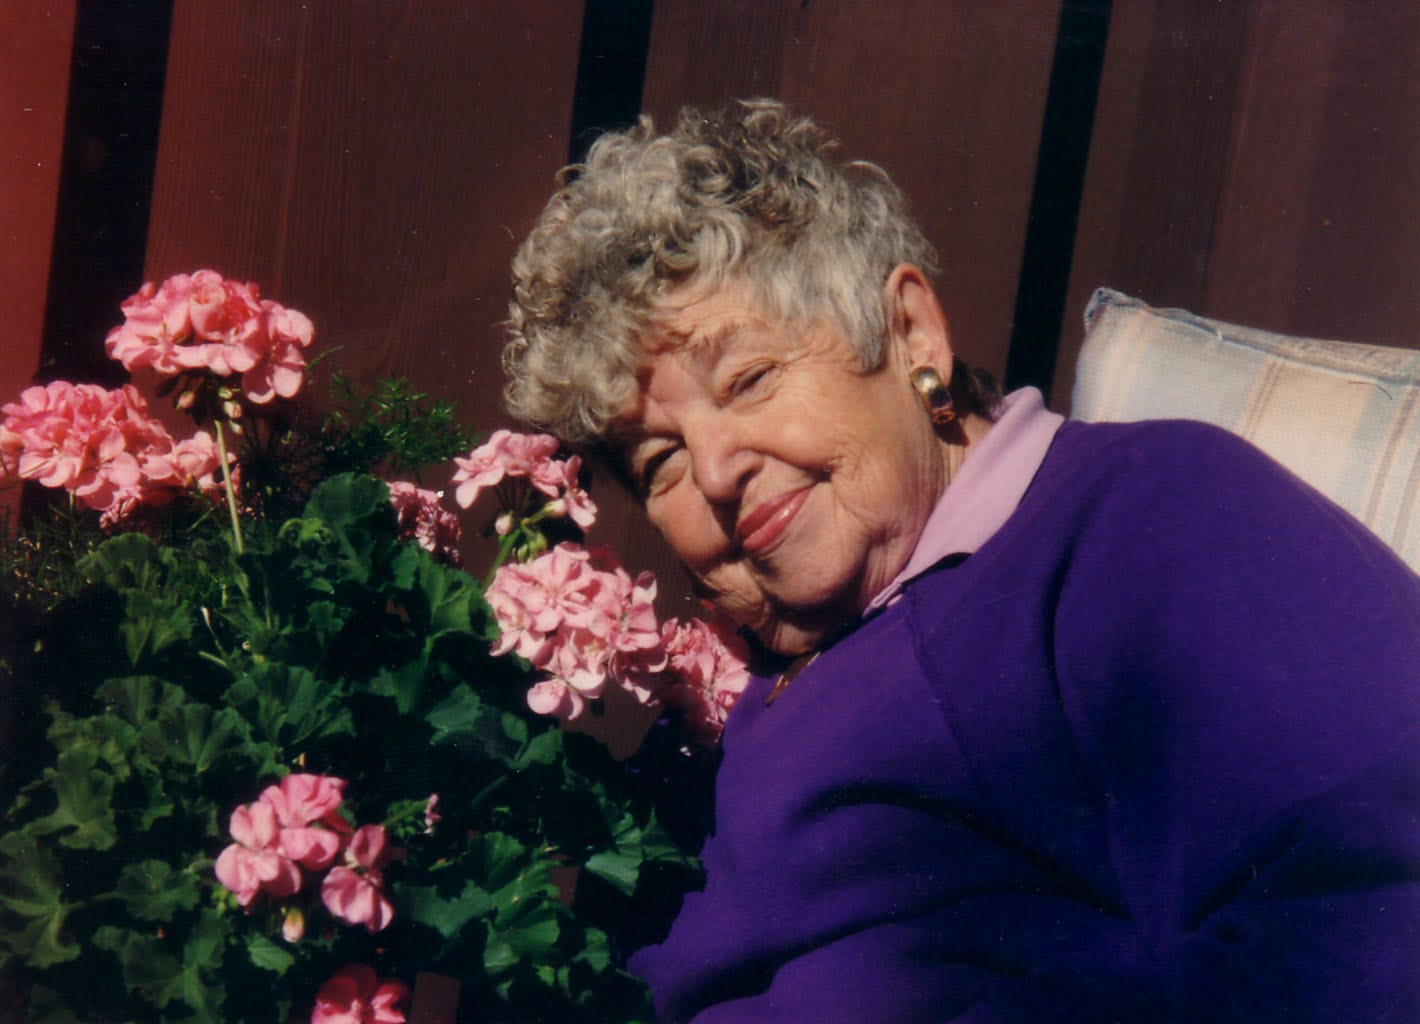 My grandmother and her flowers.